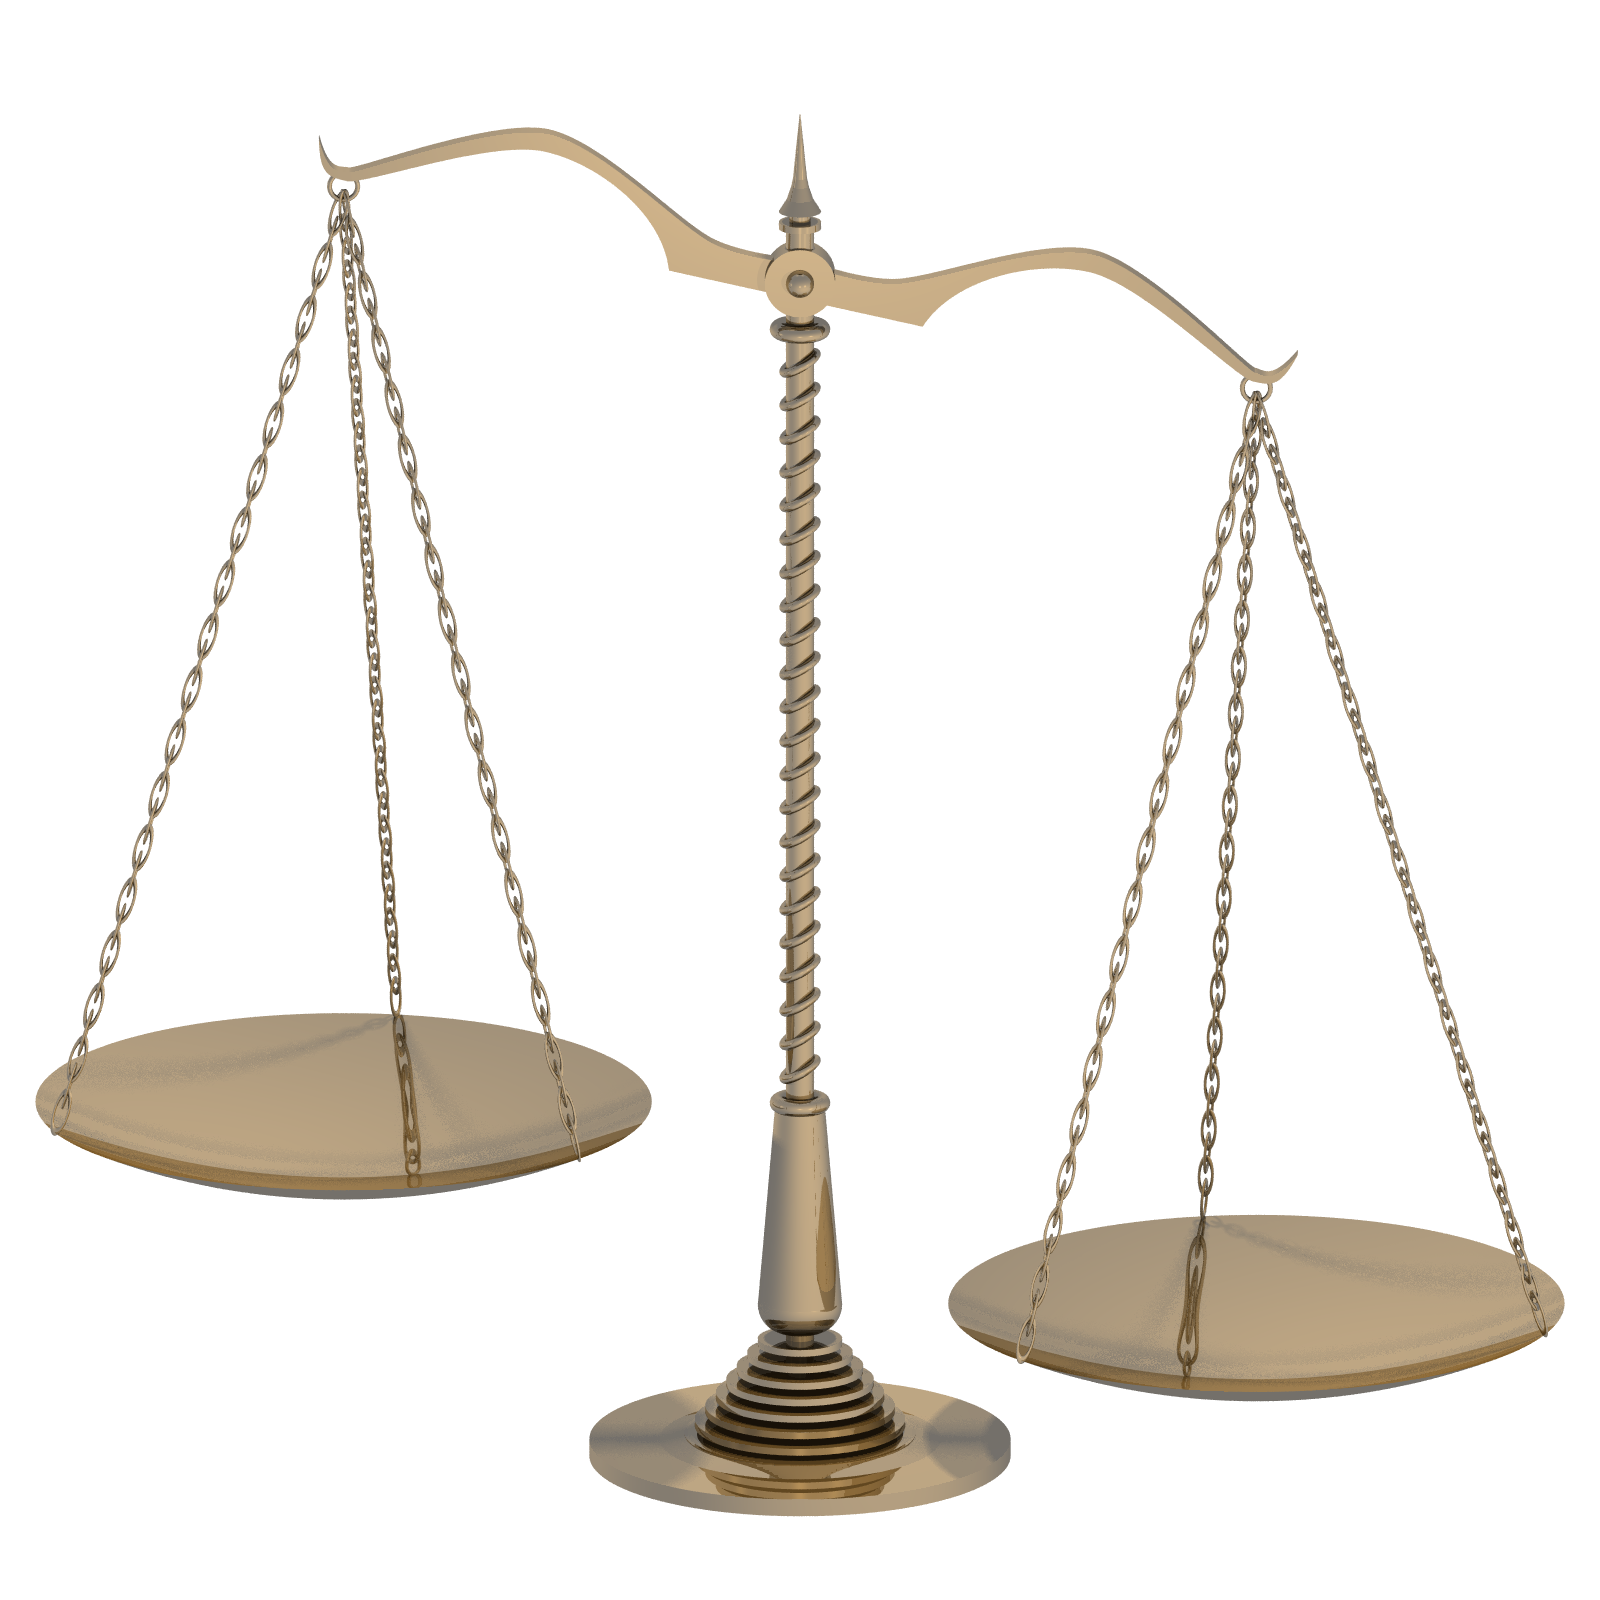 Picture Of The Scales Of Justice - Clipart library